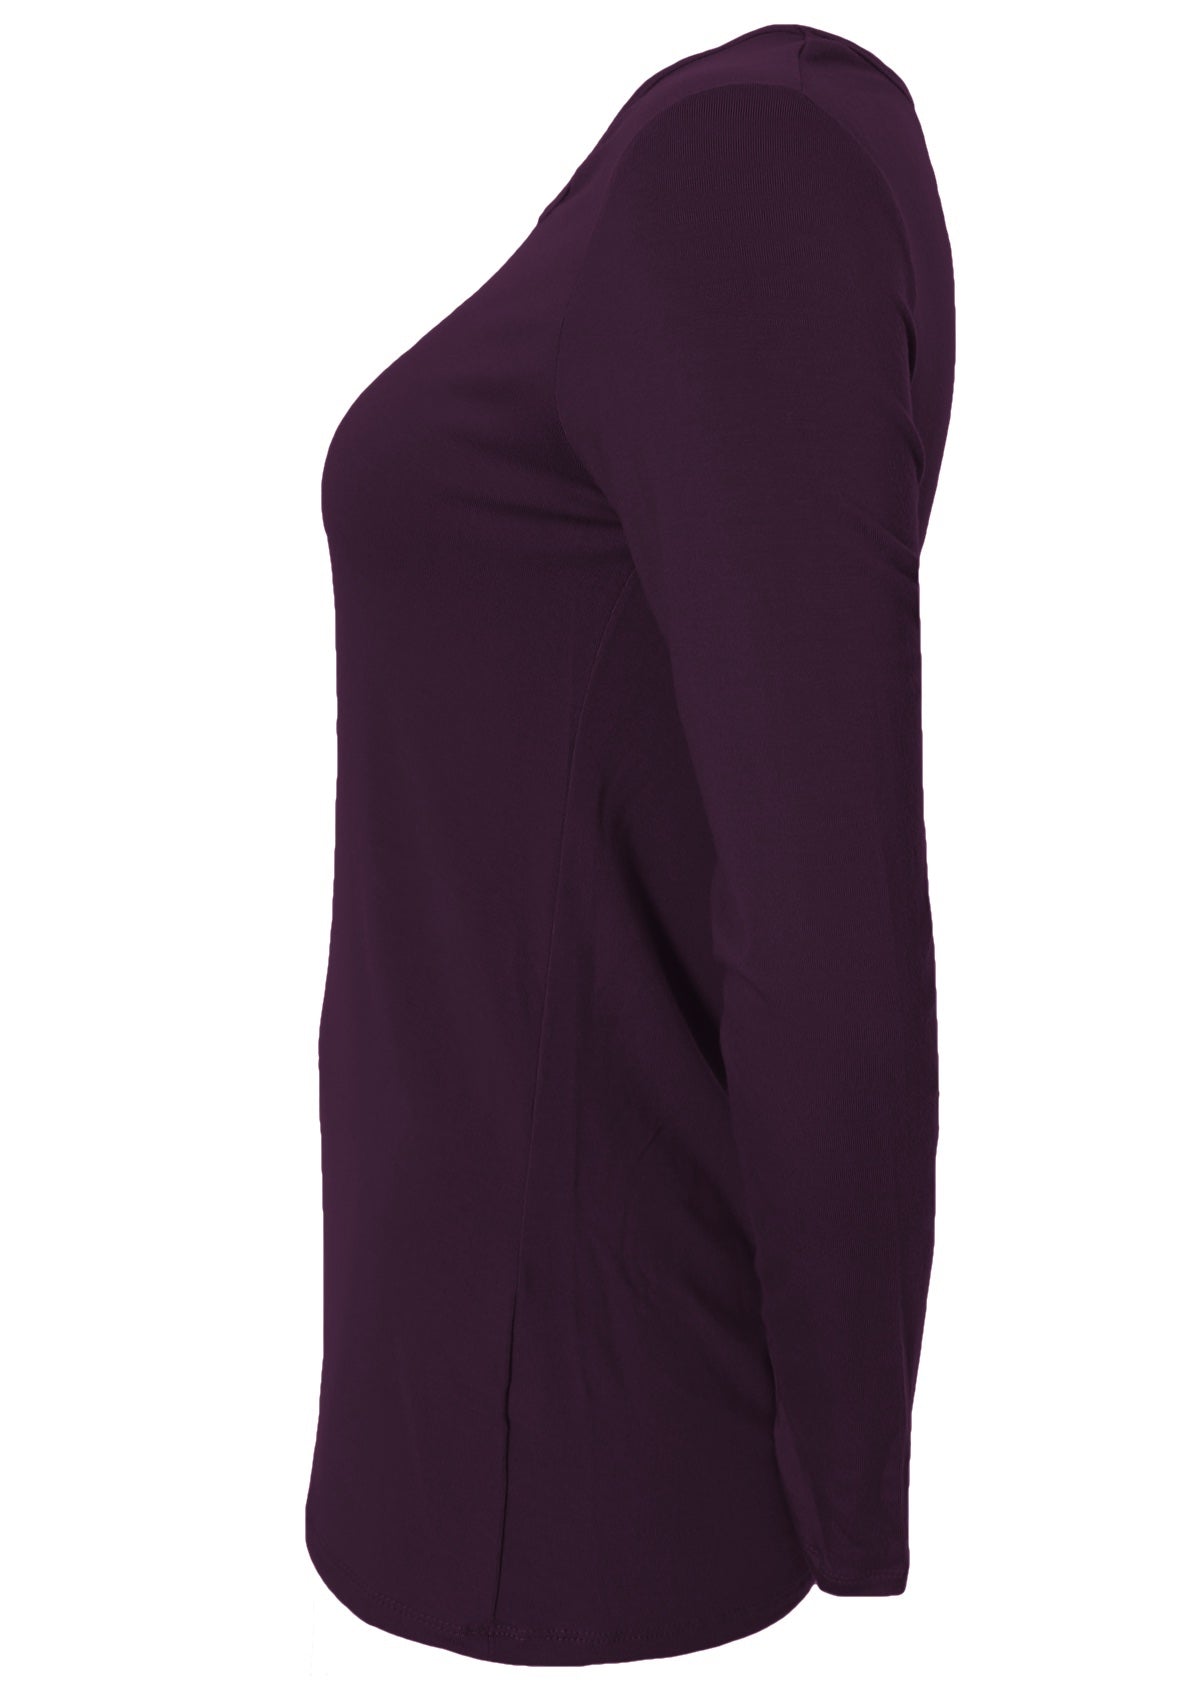 Side view of women's round neck purple long sleeve rayon top.